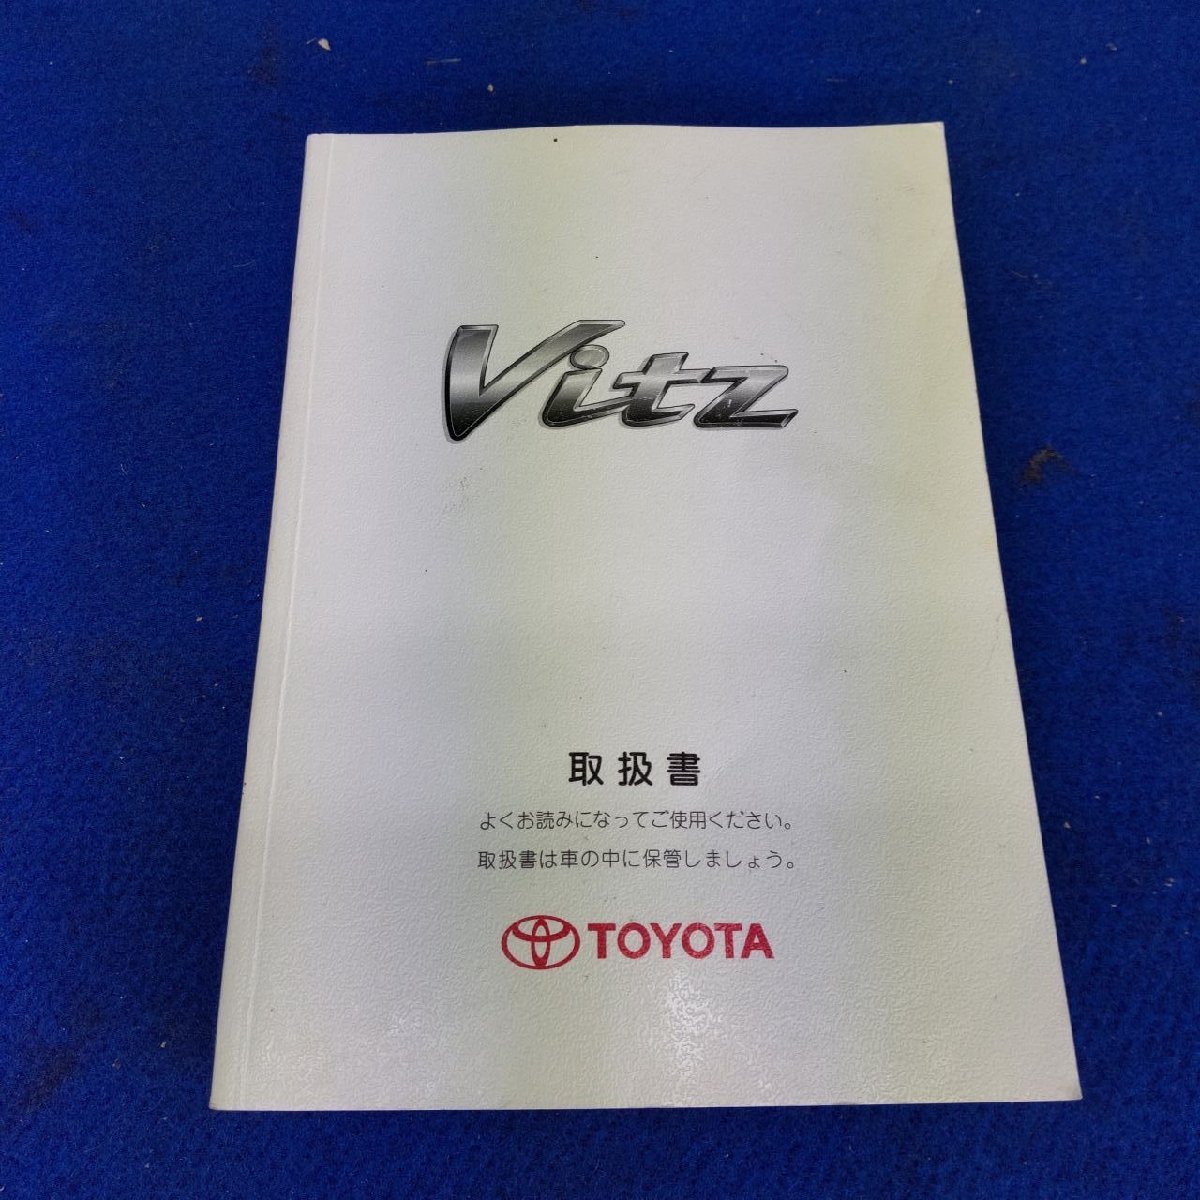 SCP90 Vitz original owner manual 1A5-11-7|23A845* including in a package un- possible 